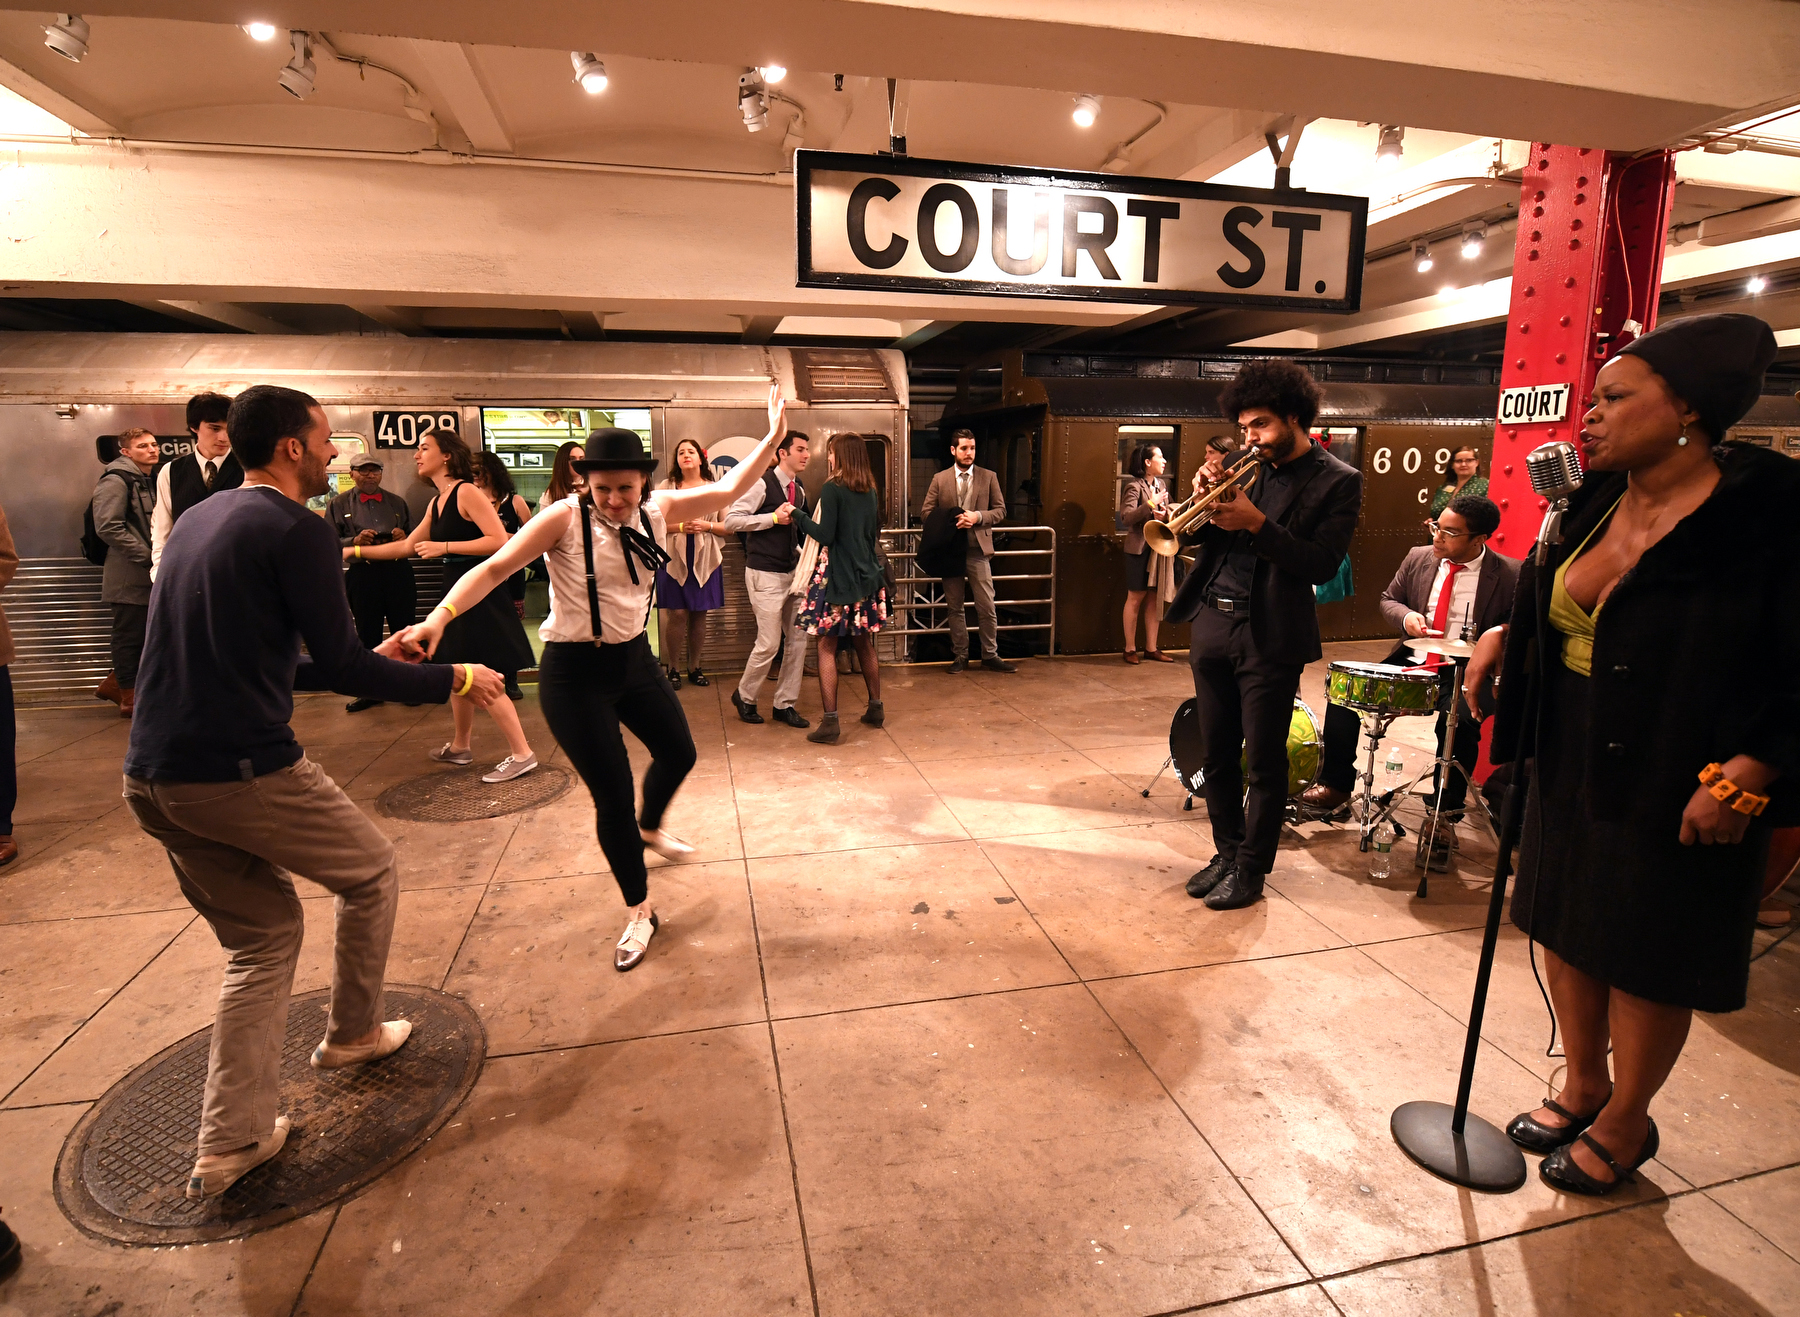 "Subway Swing" at the New York Transit Museum on Sat., December 9, 2017. Photo: Shaelyn Amaio for New York Transit Museum